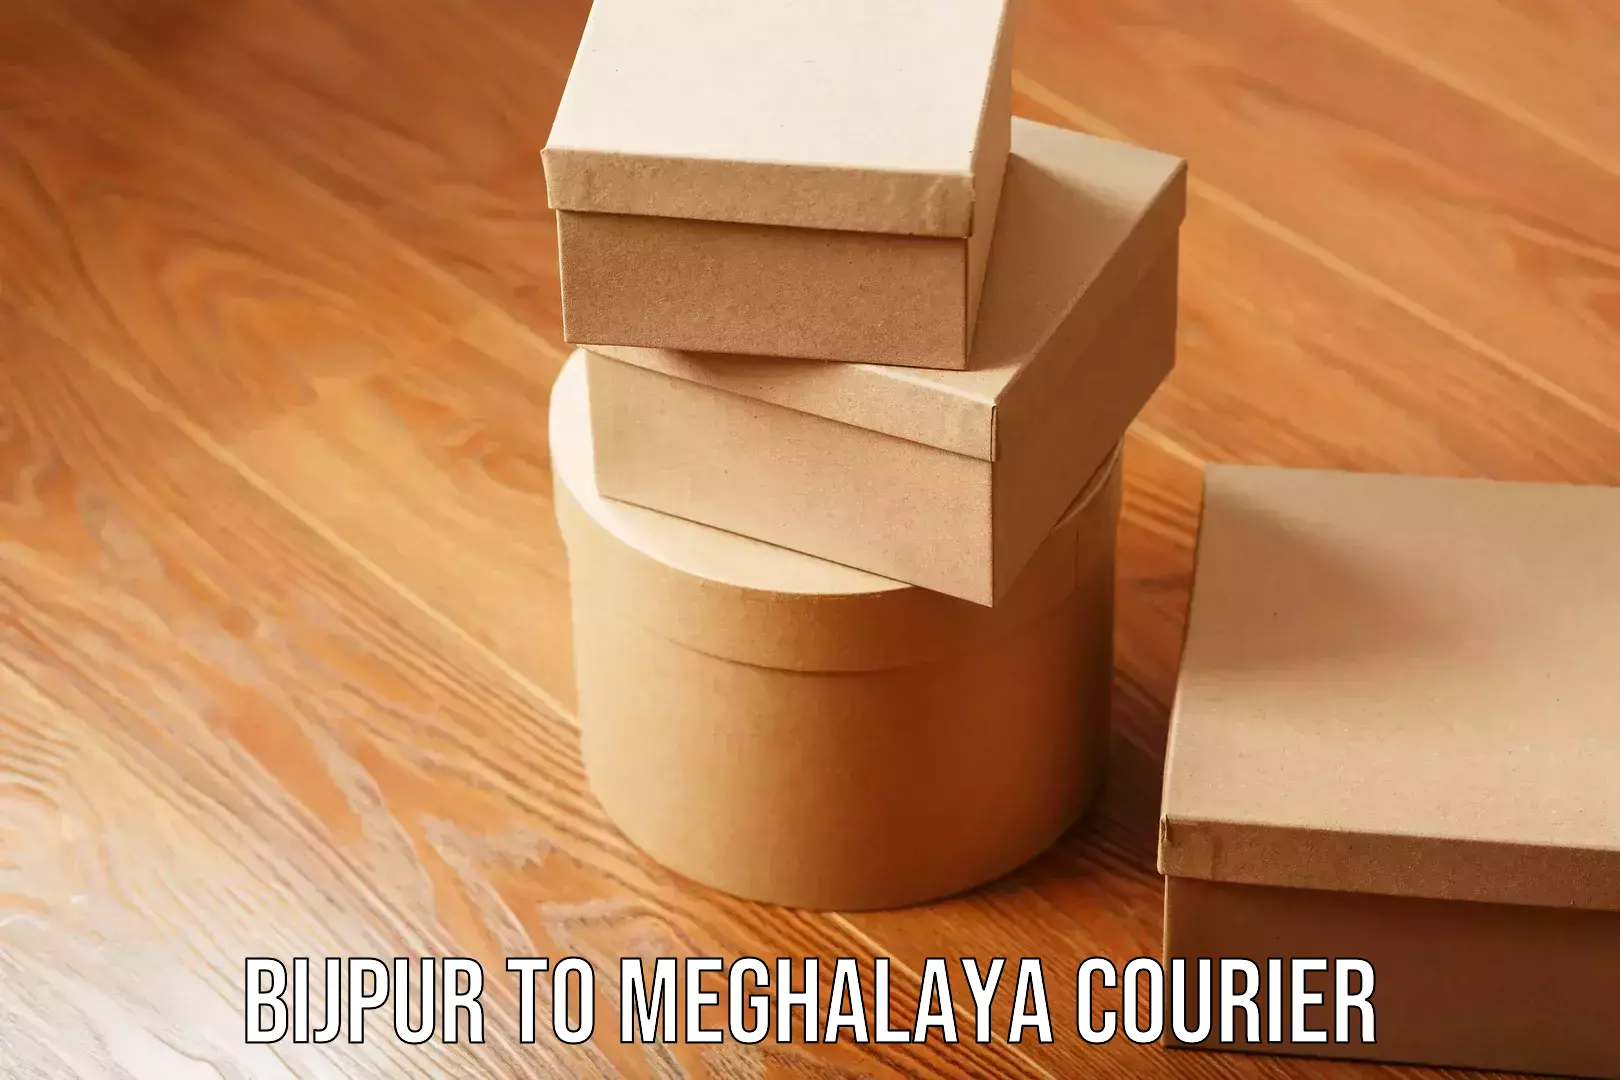 Small parcel delivery in Bijpur to Meghalaya